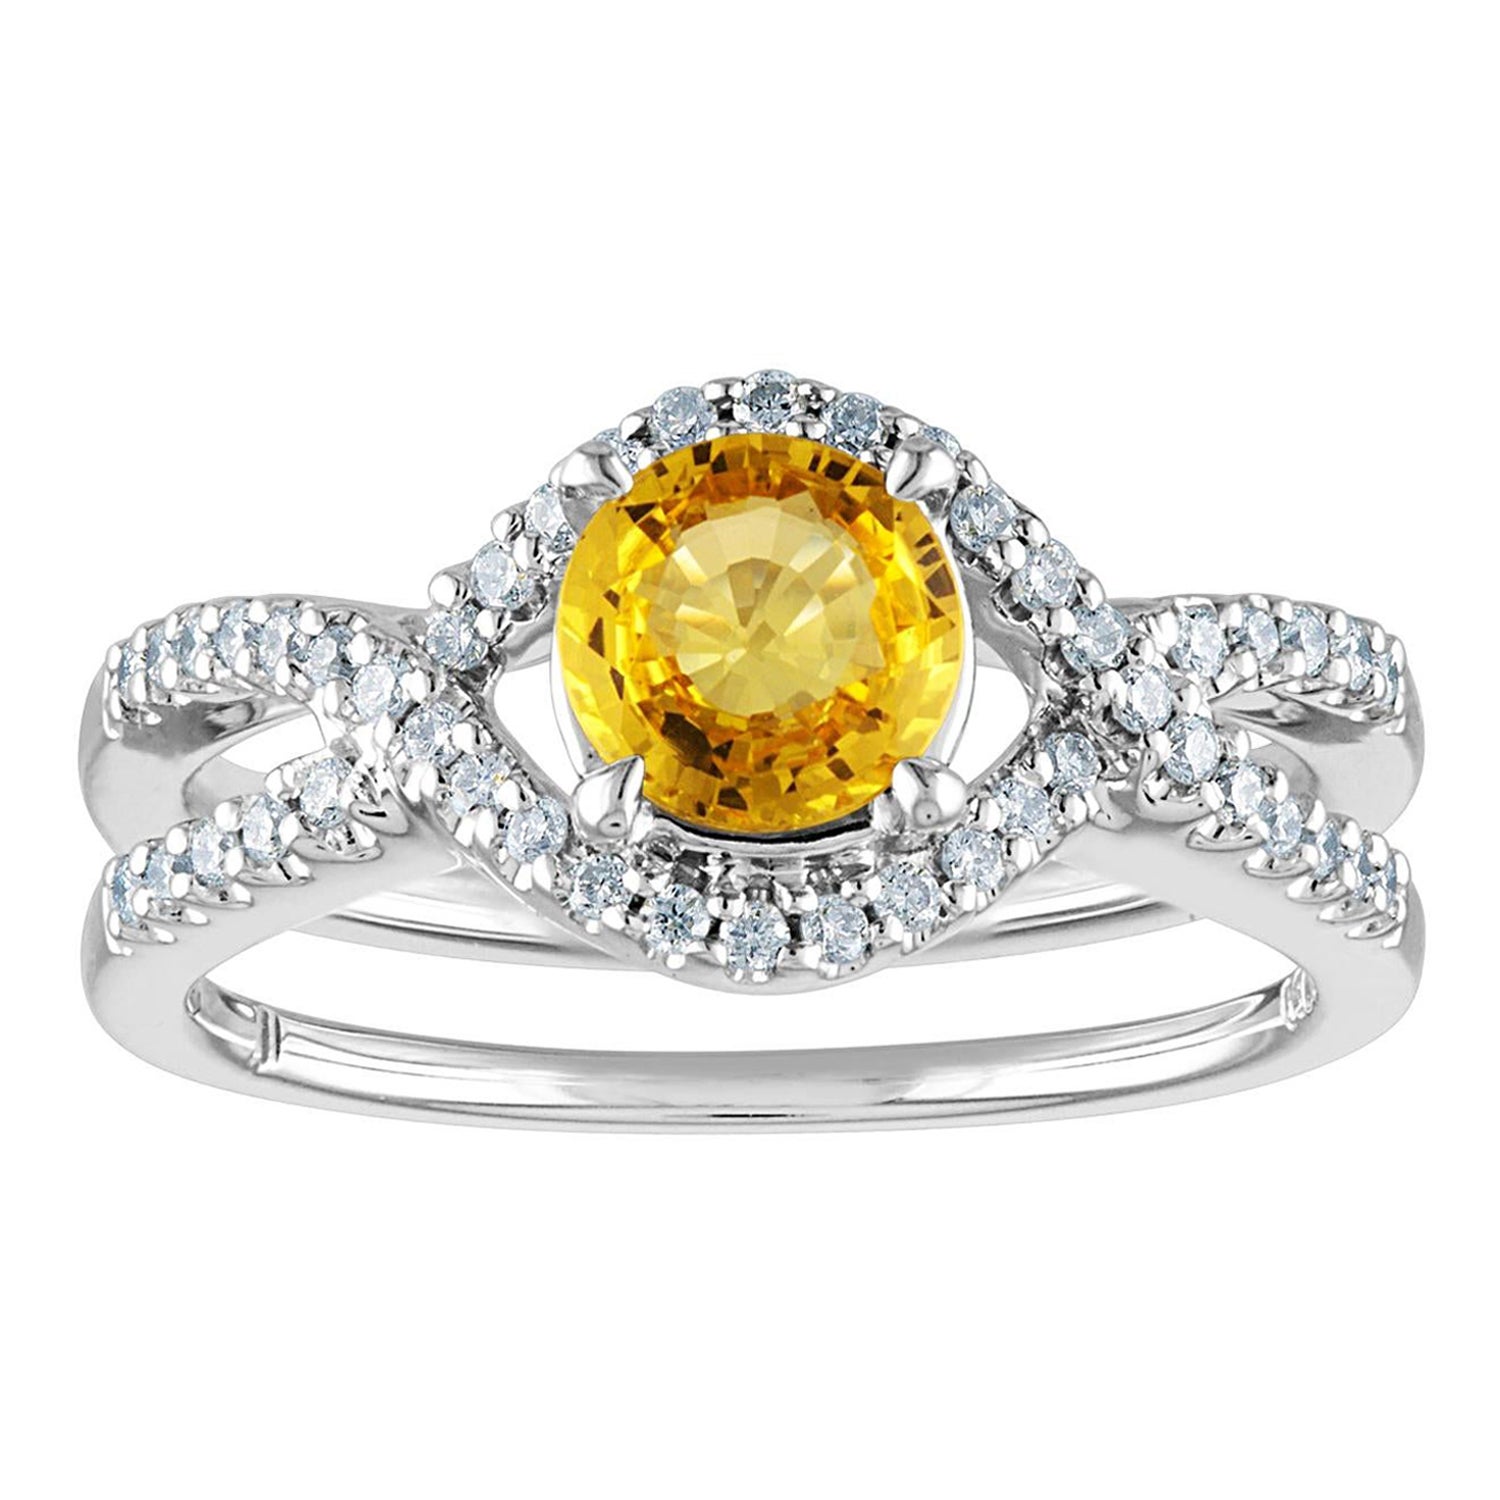 AGL Certified 0.77 Carat Round Yellow Sapphire and Diamond Gold Ring